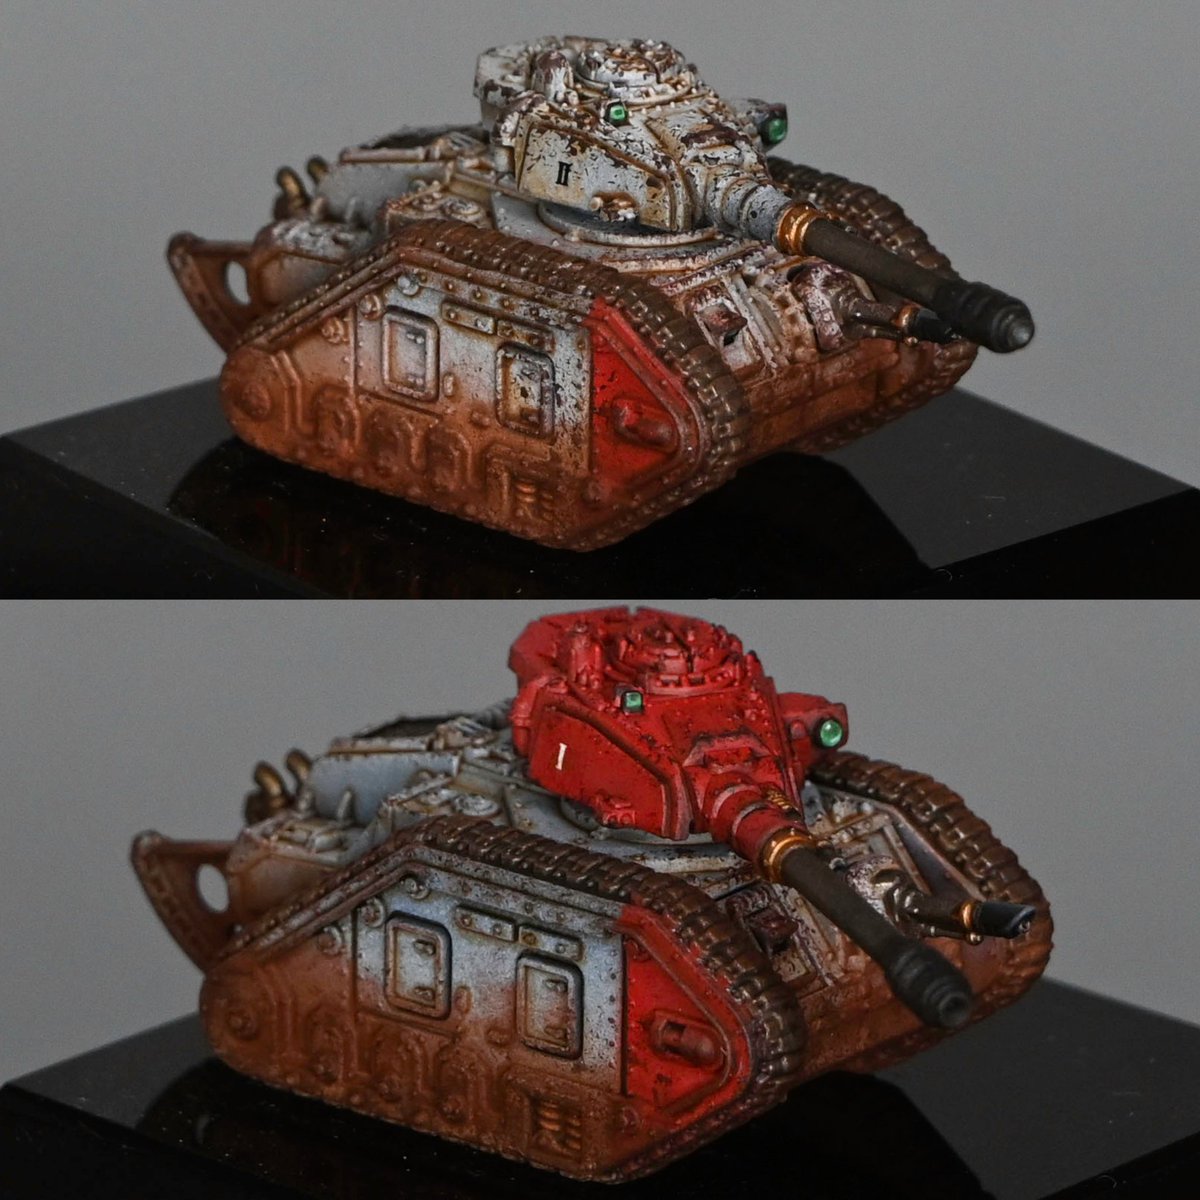 A couple of tiny Leman Russ Vanquishers. I just can't resist the Legions Imperialis tanks! These are for a YouTube video this weekend, I've tried to keep them quick and simple while retaining a bit of detail. #paintingwarhammer #WarhammerCommunity #legionsimperialis #AdWIP